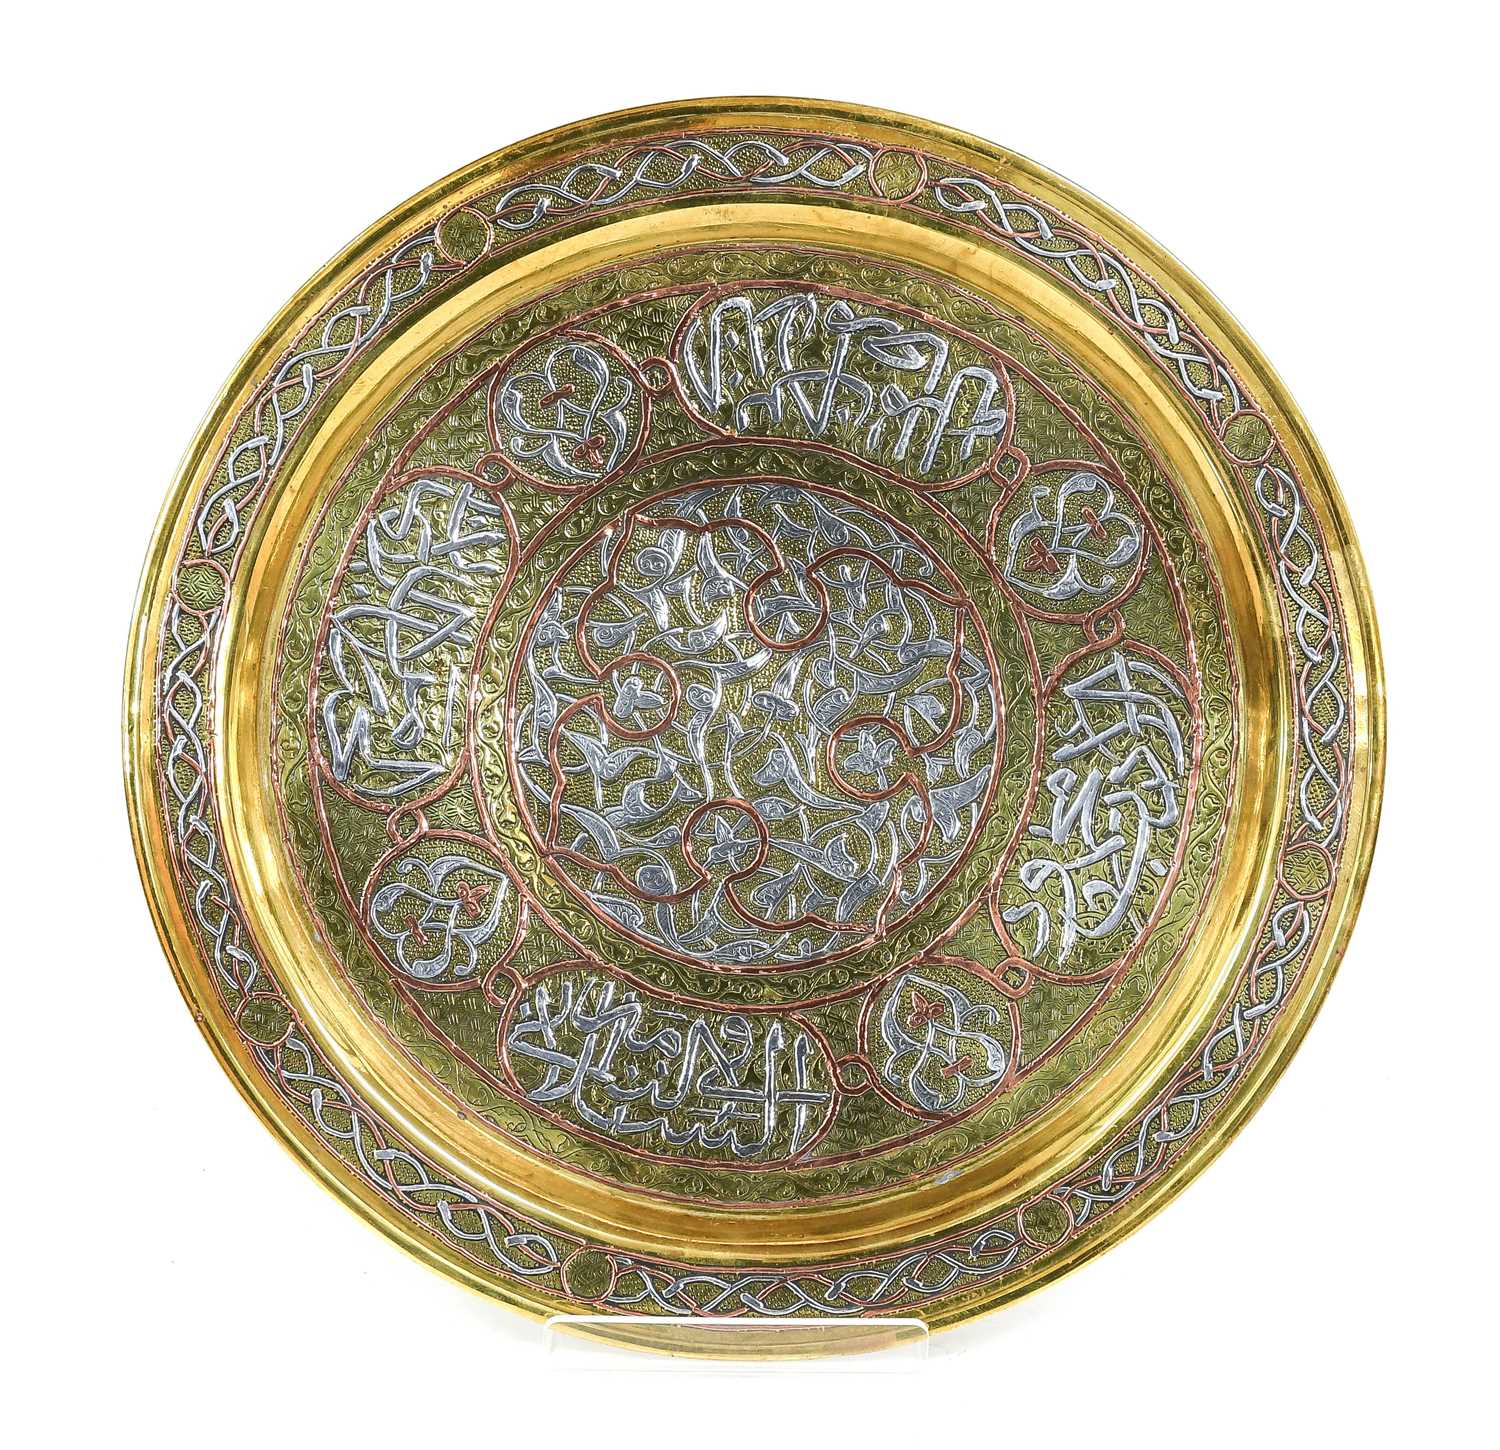 A Cairoware Circular Tray, late 19th/20th century, inlaid in copper and silver with bands of - Image 3 of 4